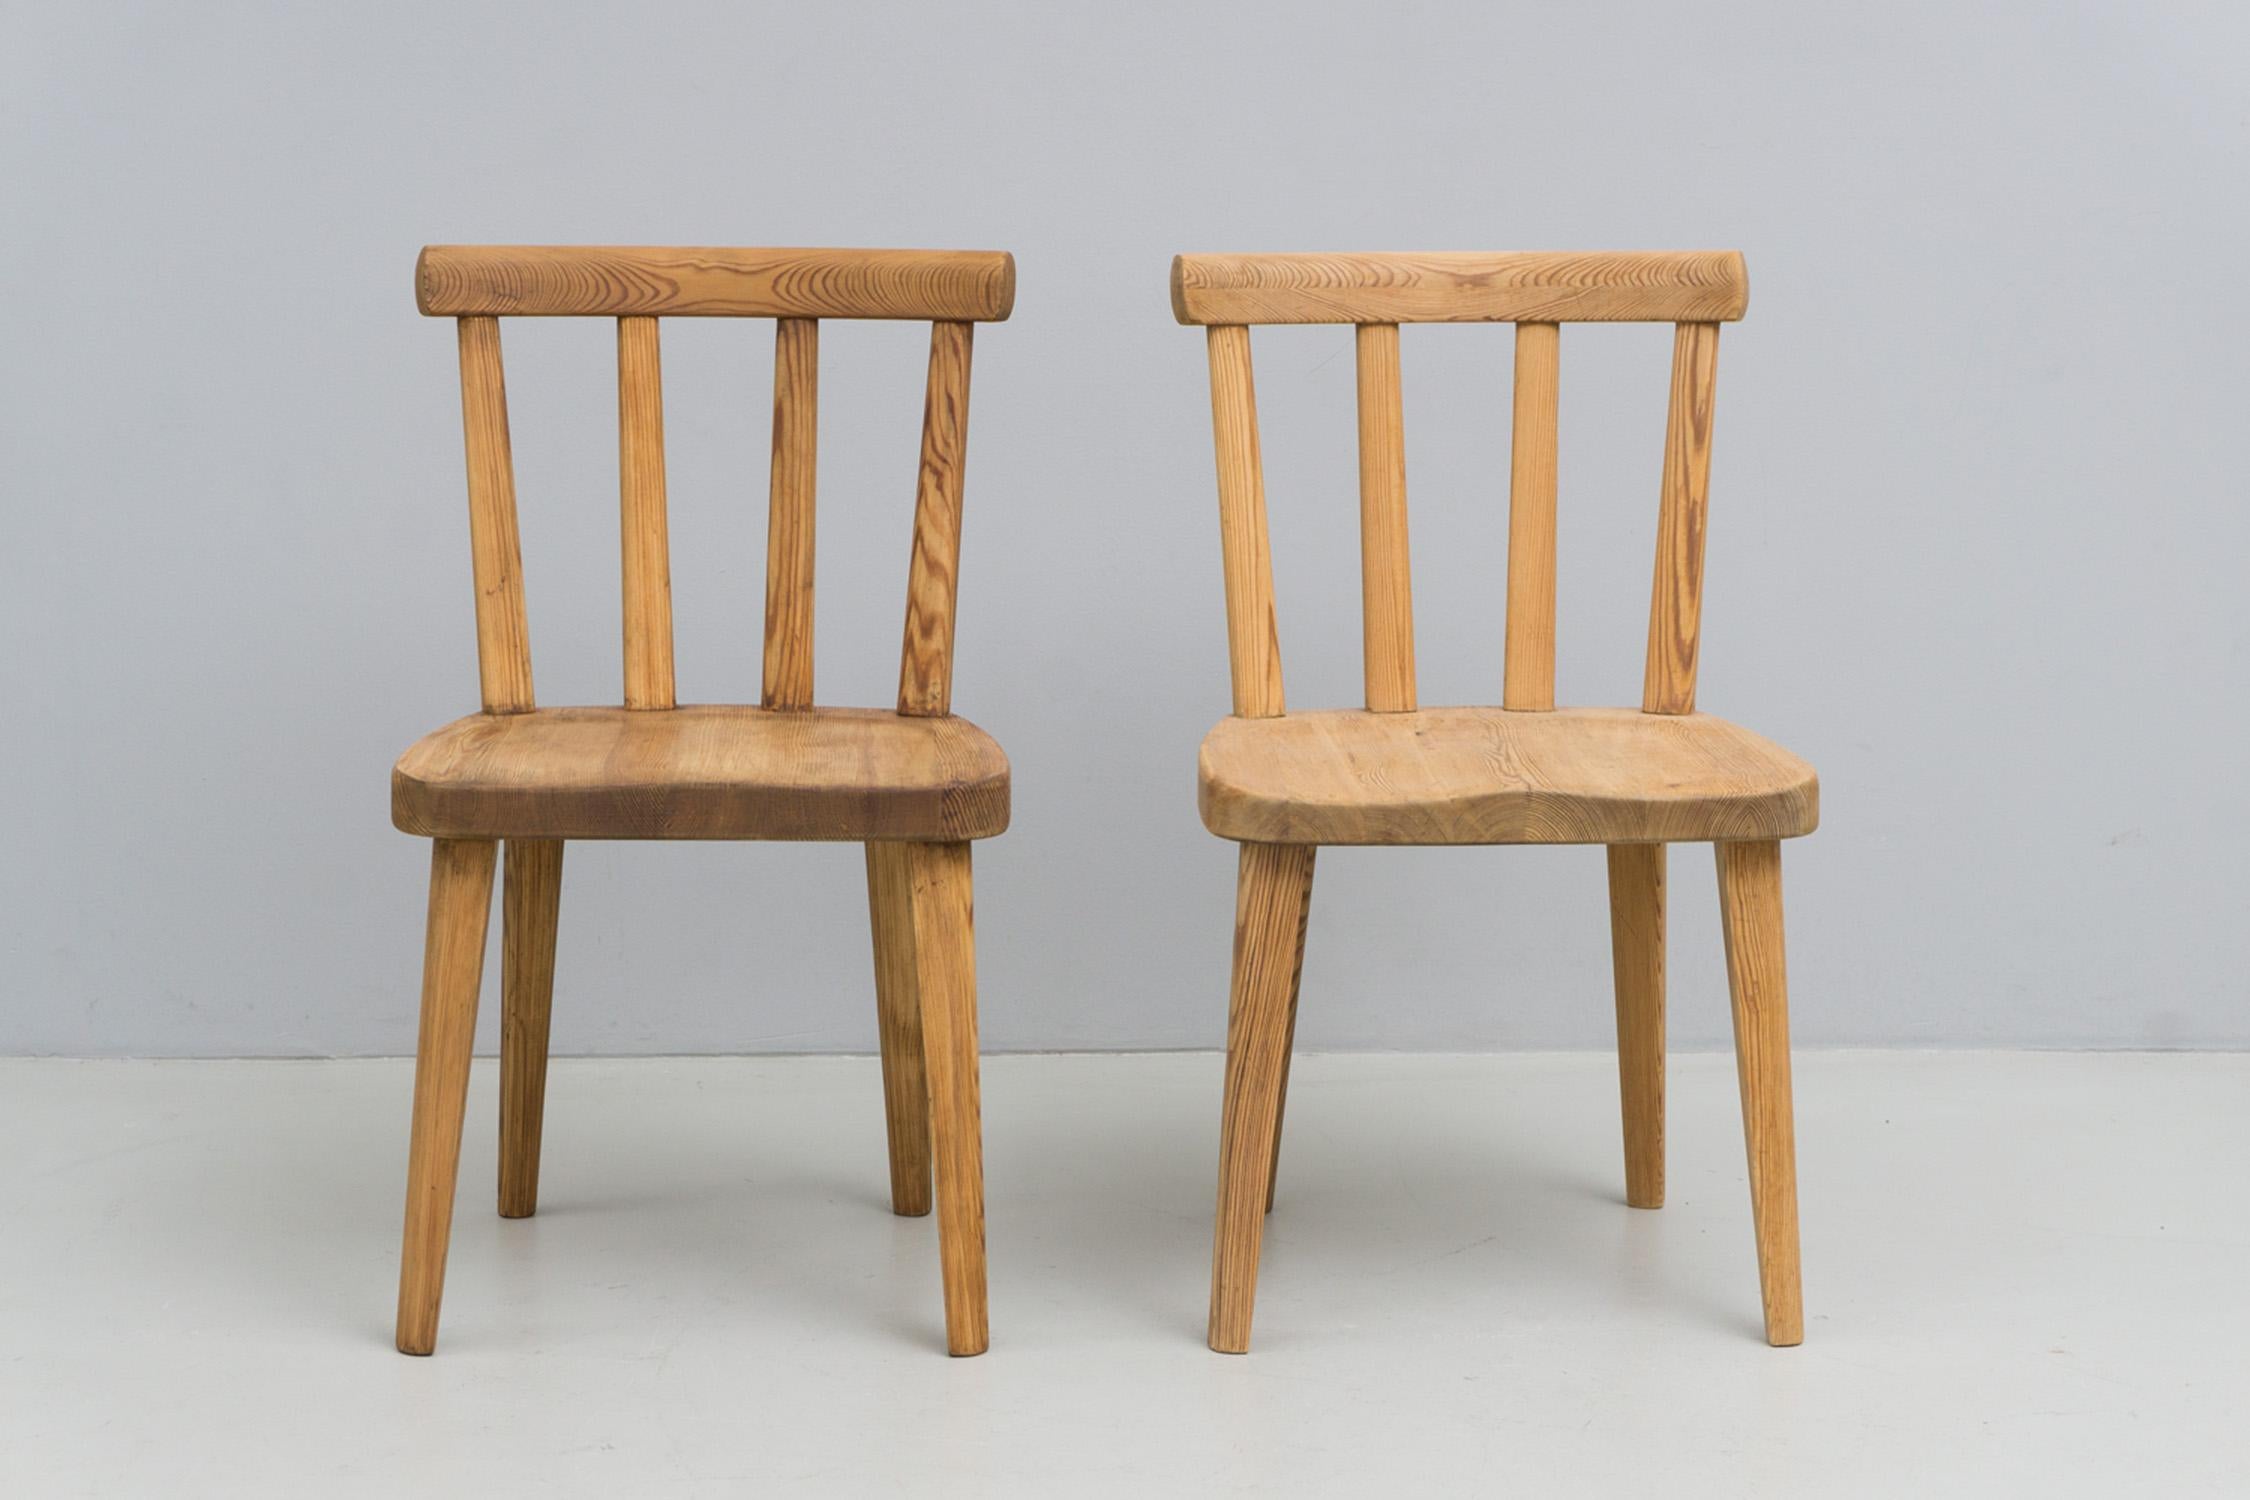 European Set of Swedish Pine Wood Chairs, 'Uto' by Axel Einar Hjorth, 1930 For Sale